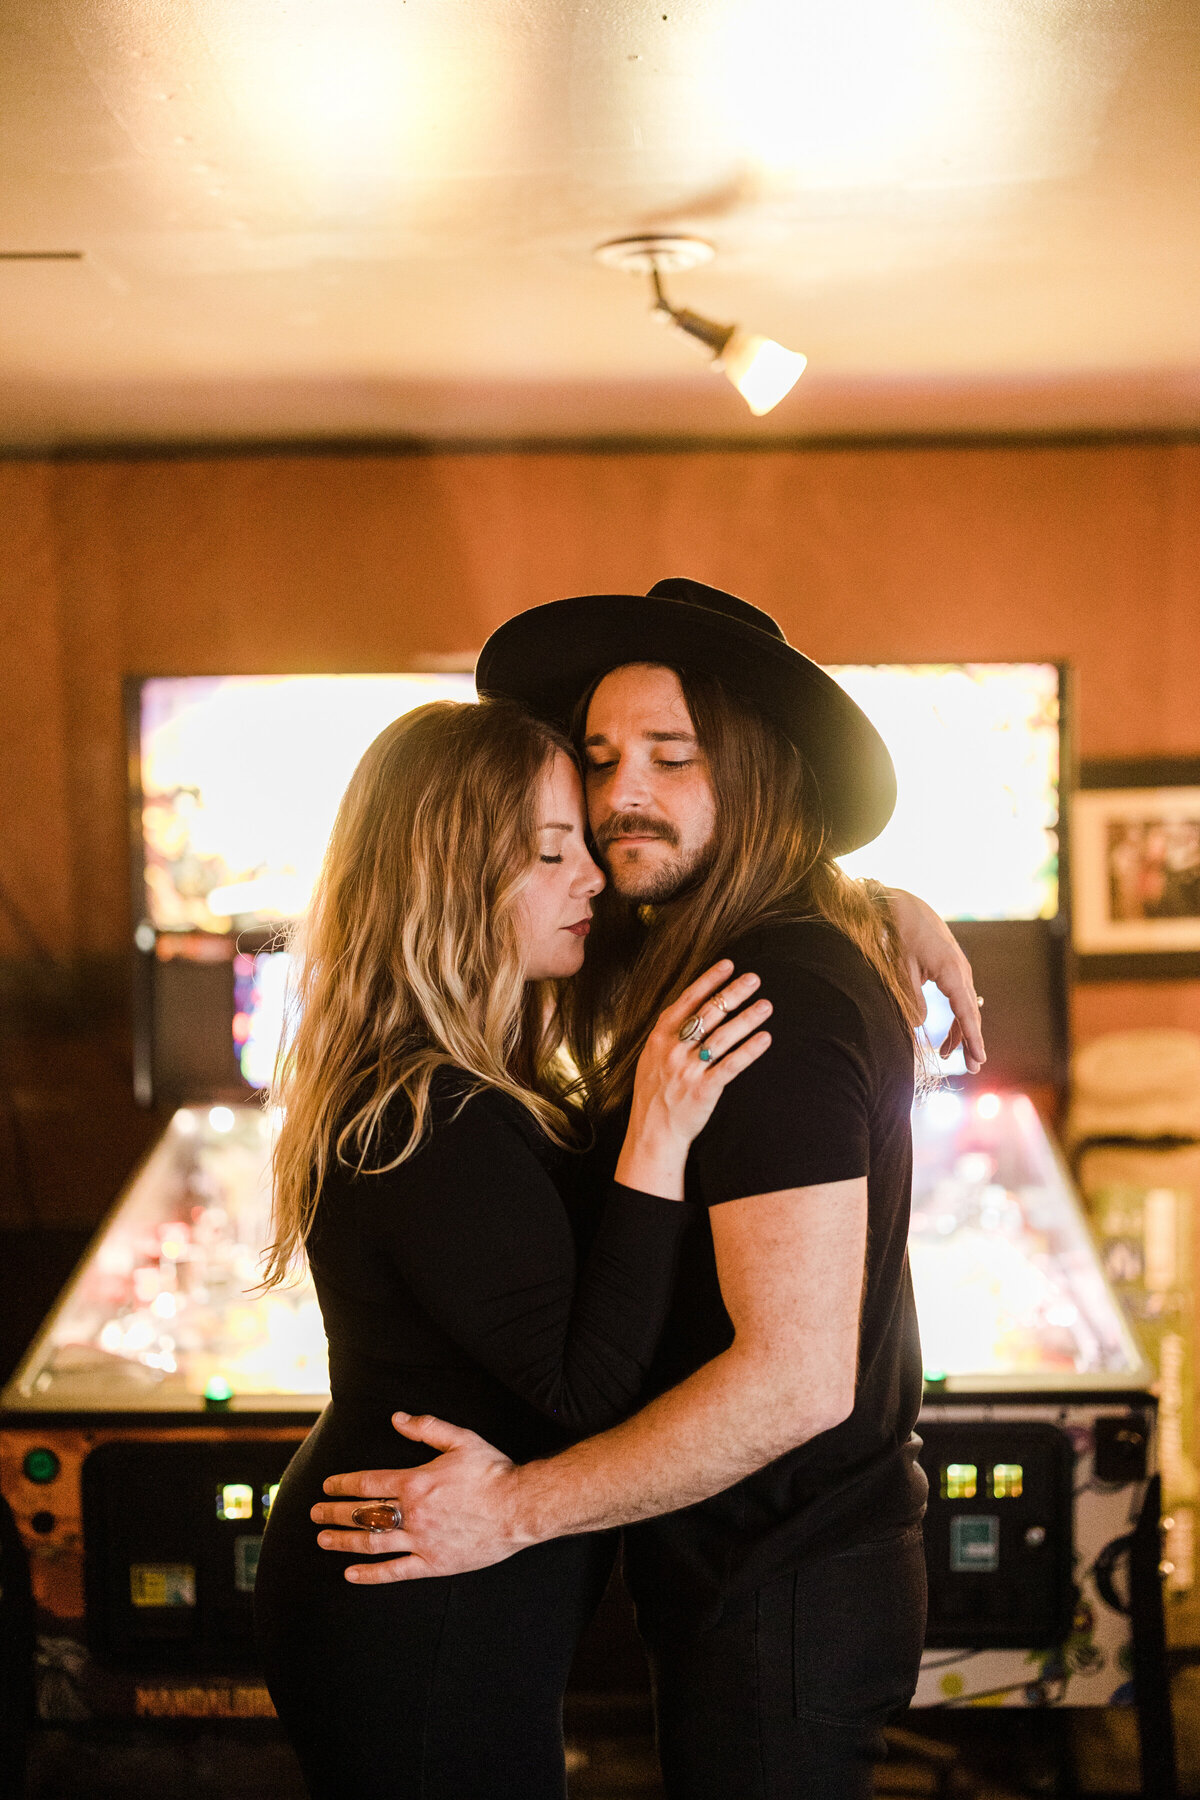 A couple holding each other close with closed eyes during their engagement photoshoot in Fort Worth, Texas. Both are dressed in all black and the man on the right has a black, large brimmed hat on. They both stand in front of multiple pinball machines.